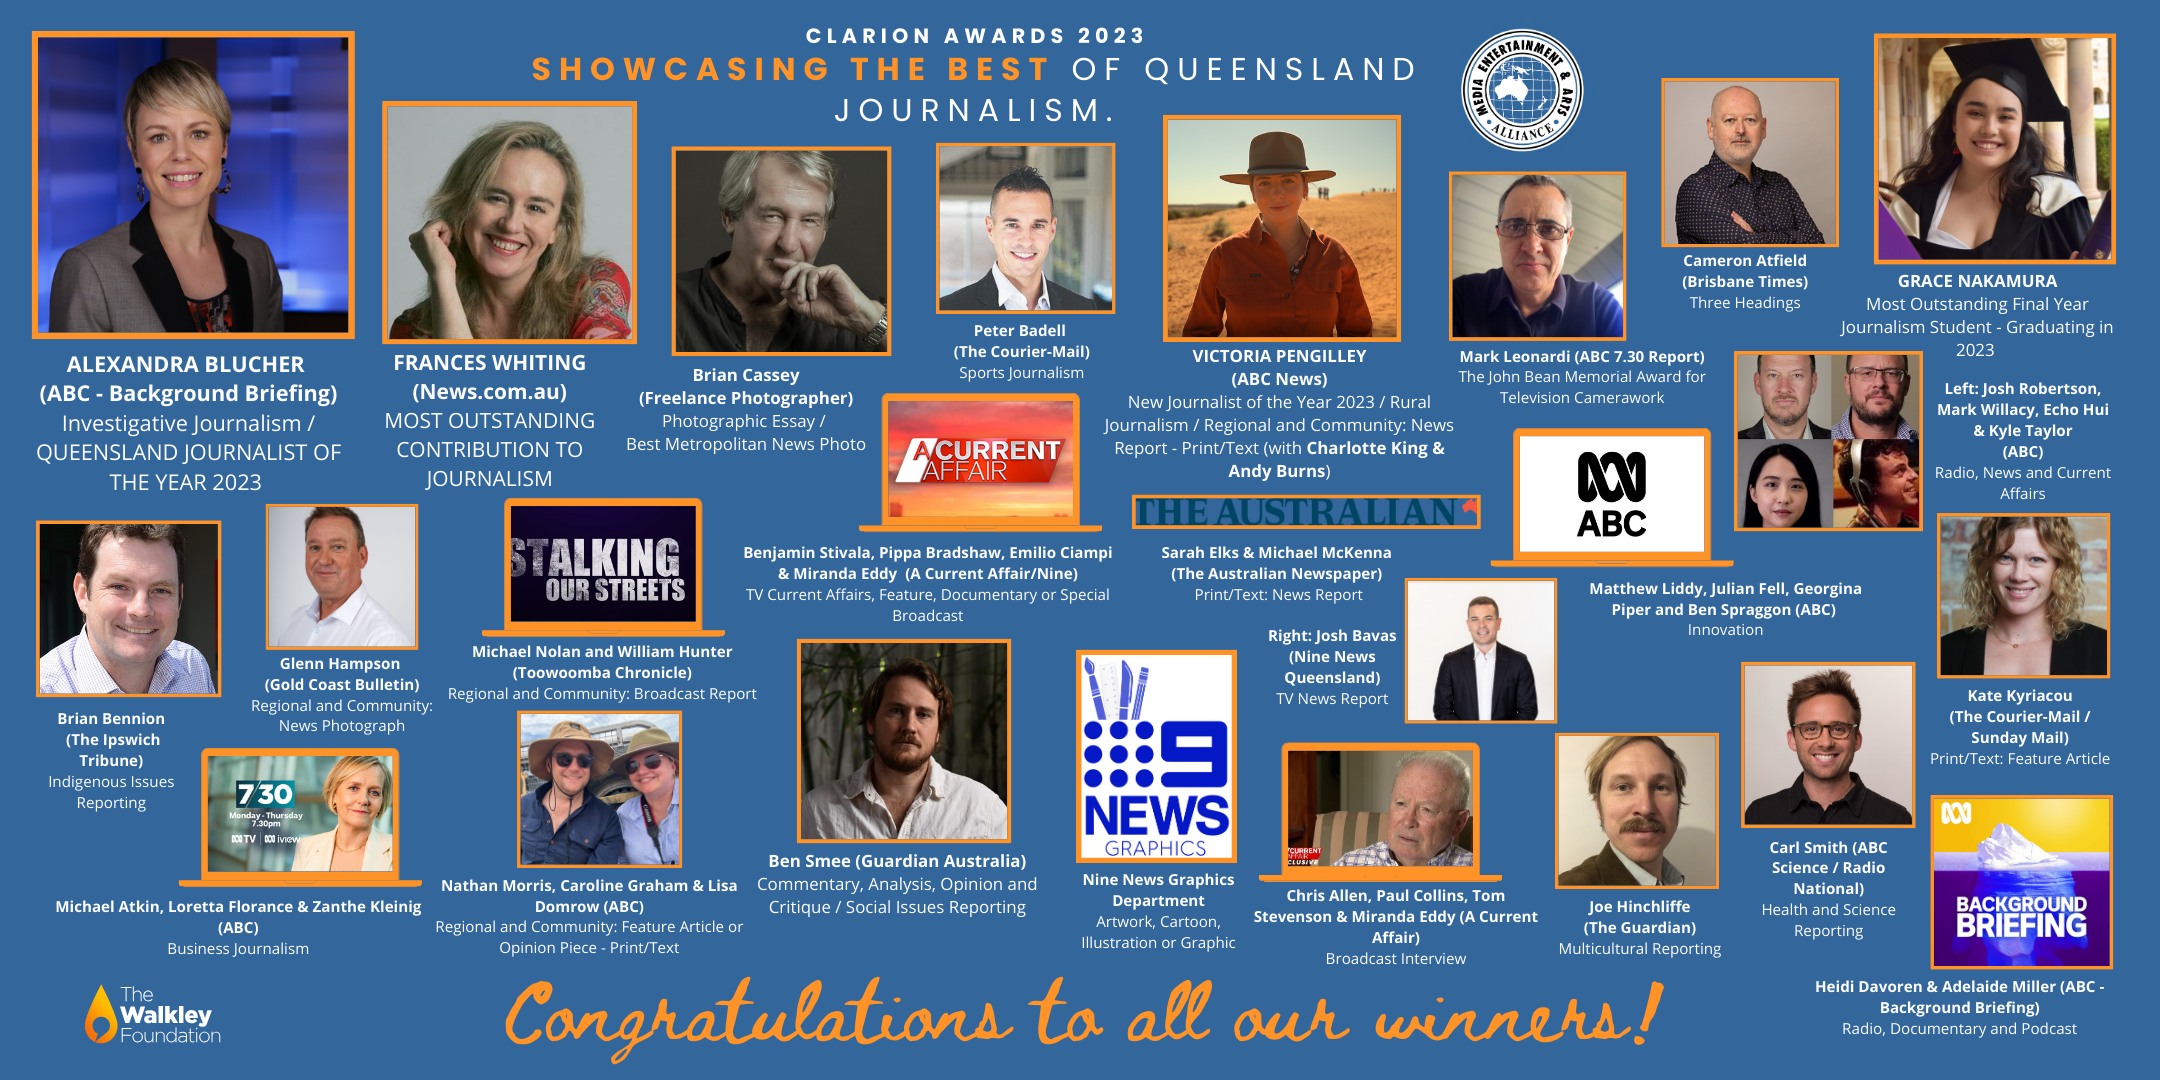 https://www.meaa.org/wp-content/uploads/2023/10/WINNERS-QUEENSLAND-CLARION-AWARDS-2023-2160-x-1080-px.png